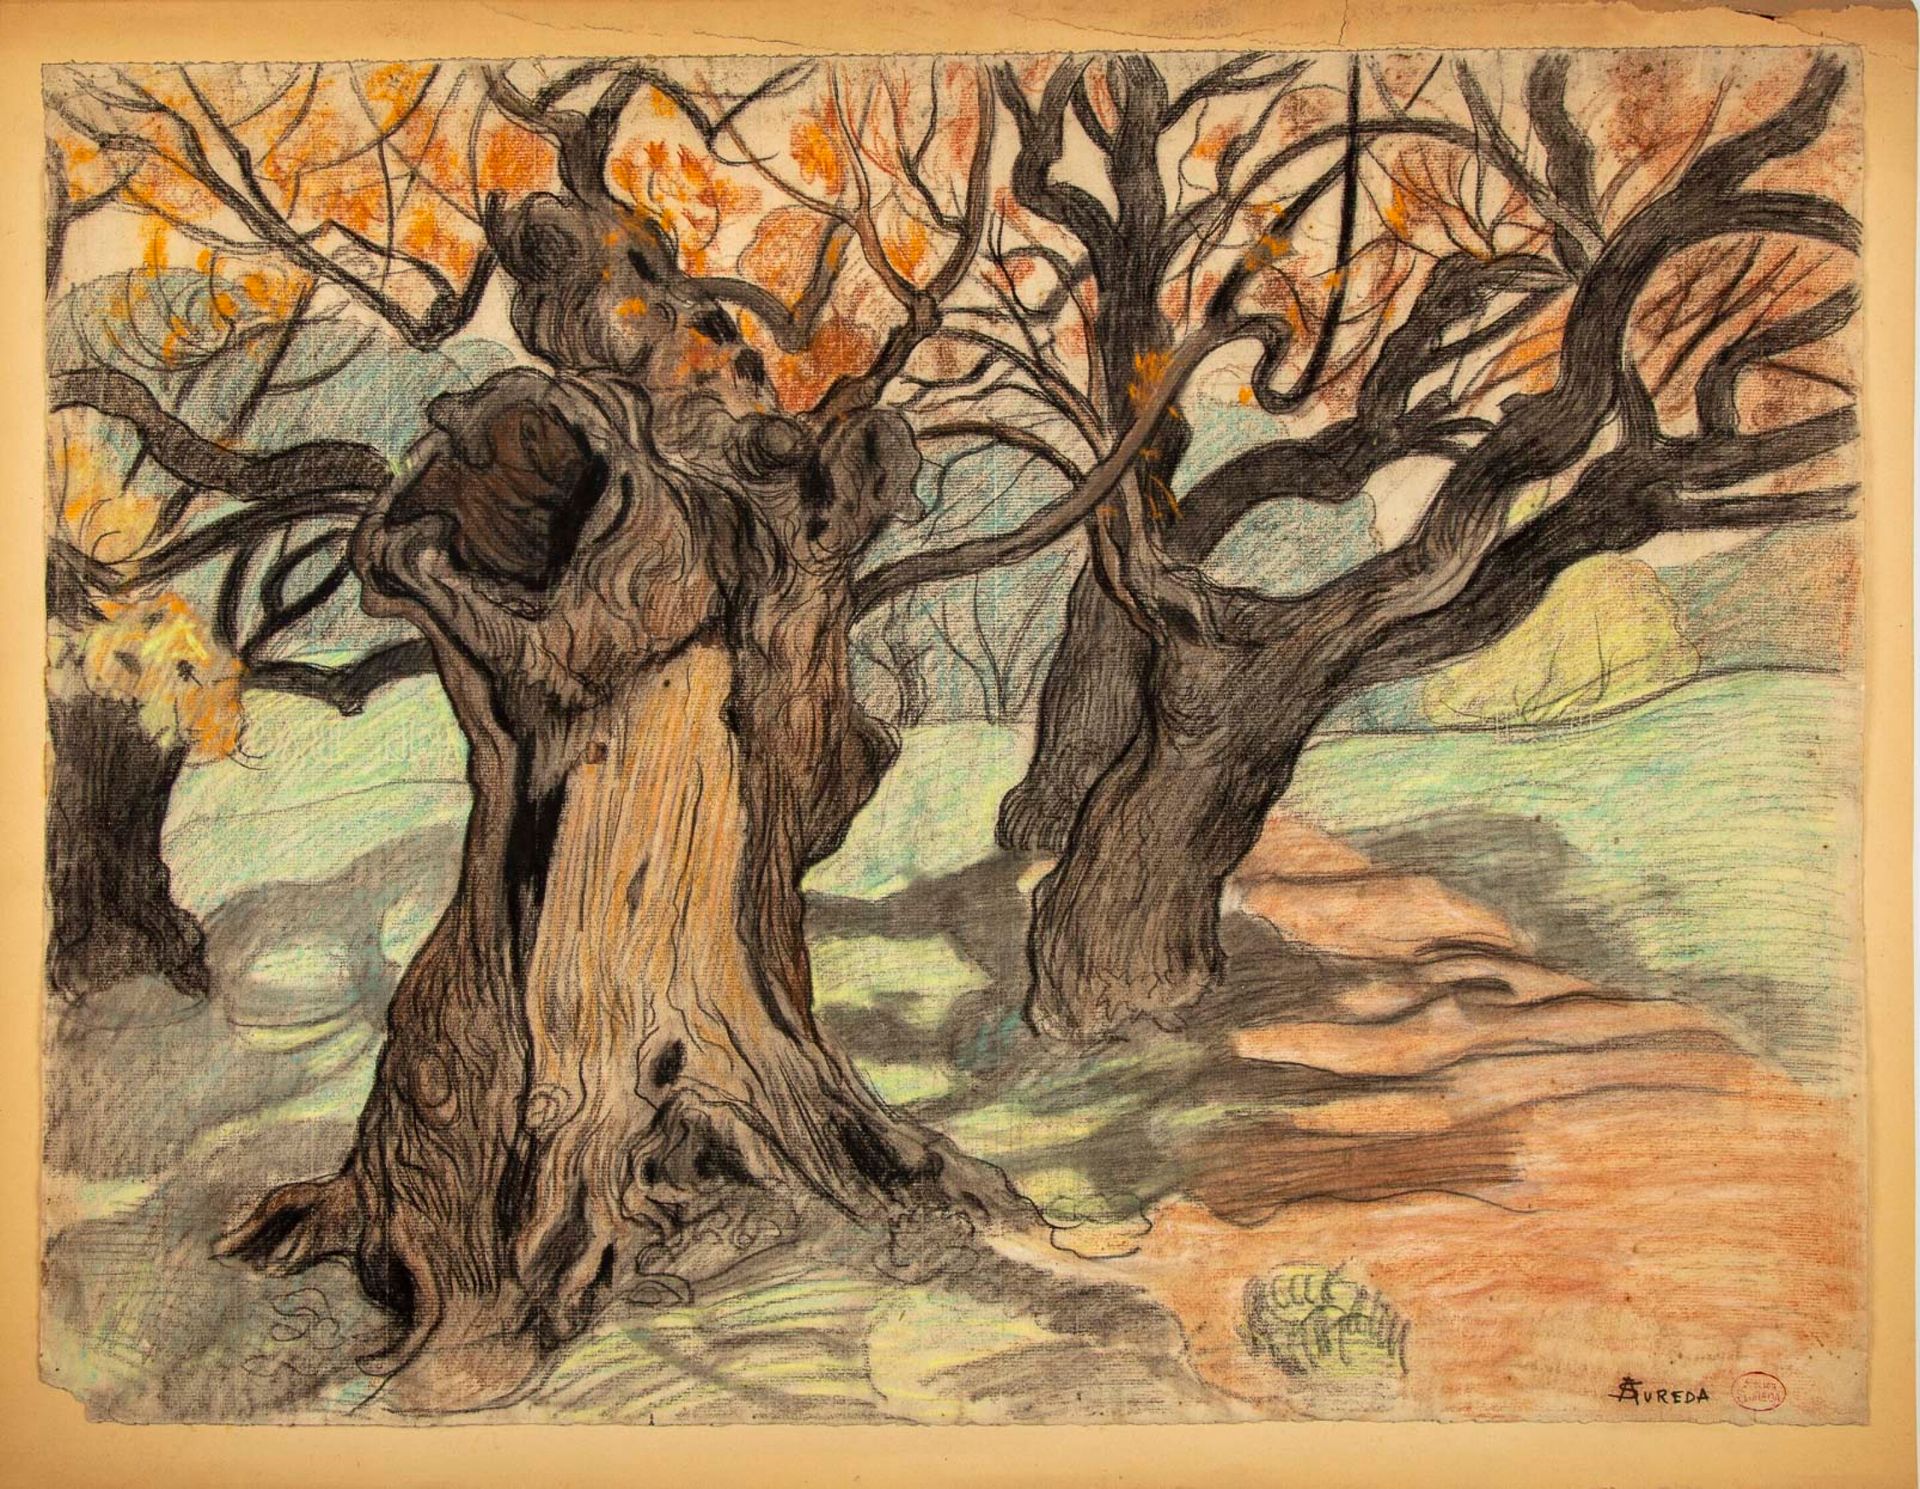 SUREDA André SURÉDA (1872-1930)

Landscape with trees

Charcoal and pastel drawi&hellip;